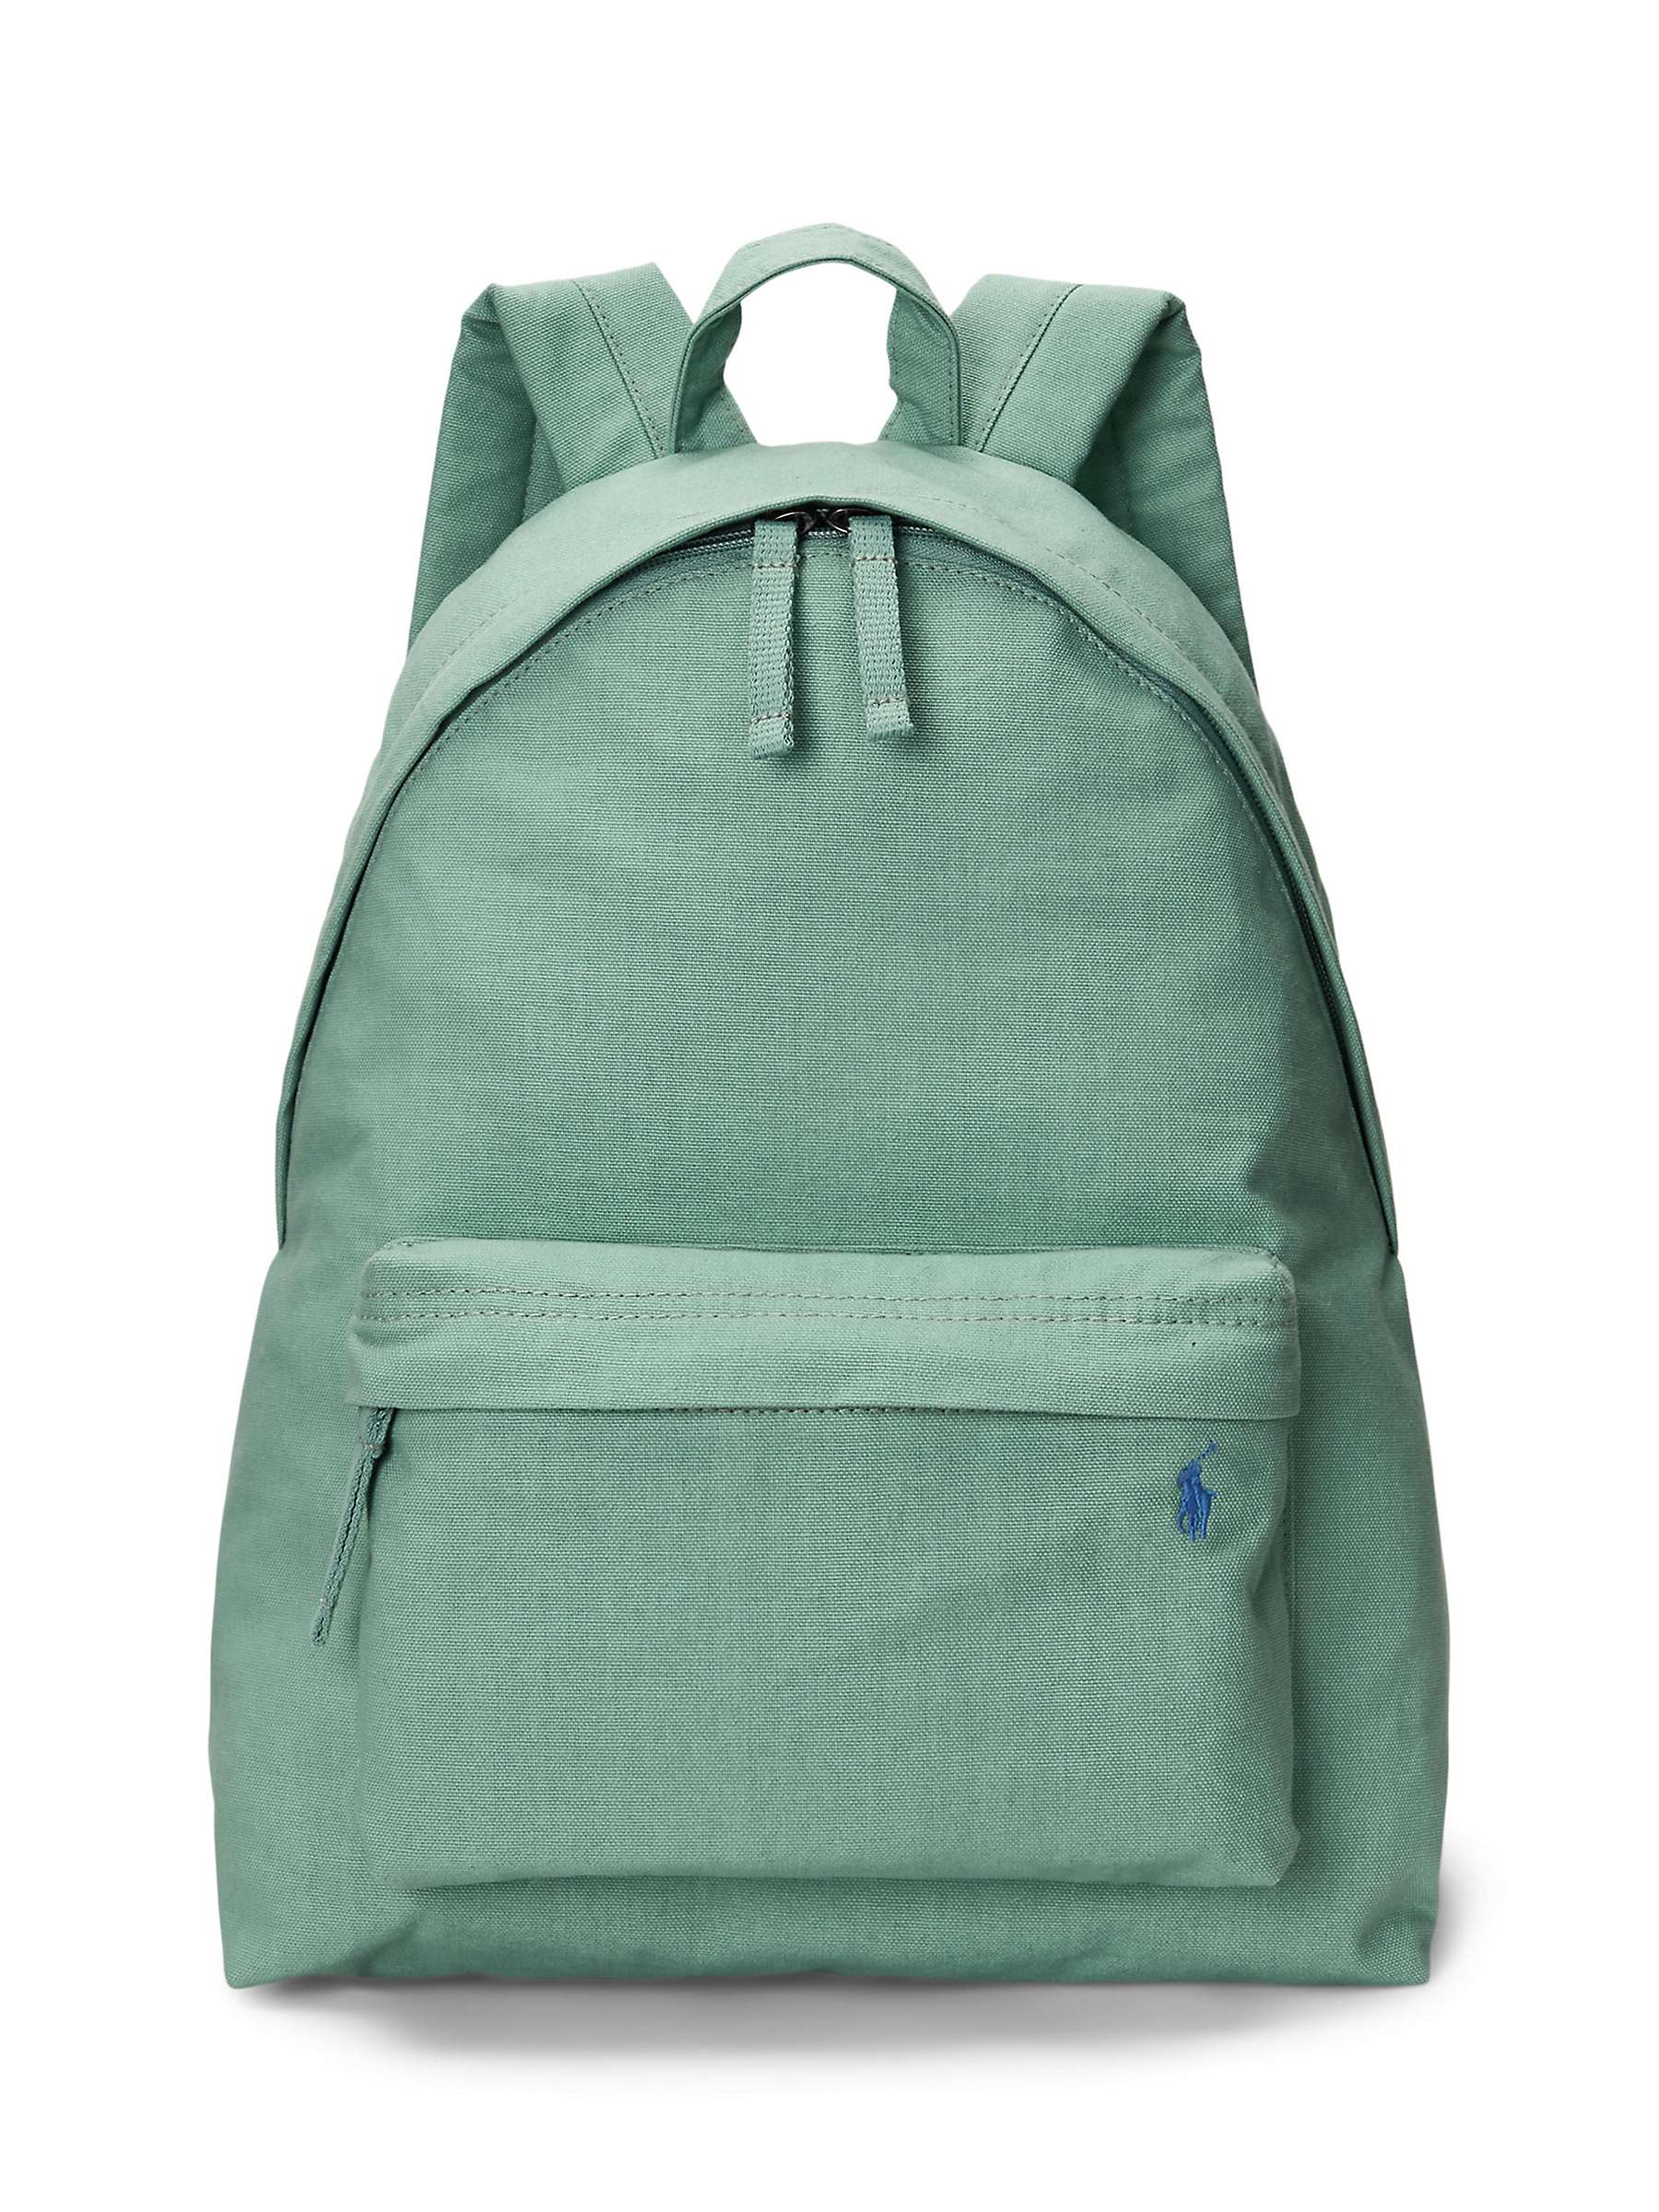 Buy Ralph Lauren Large Canvas Backpack, Faded Mint Online at johnlewis.com